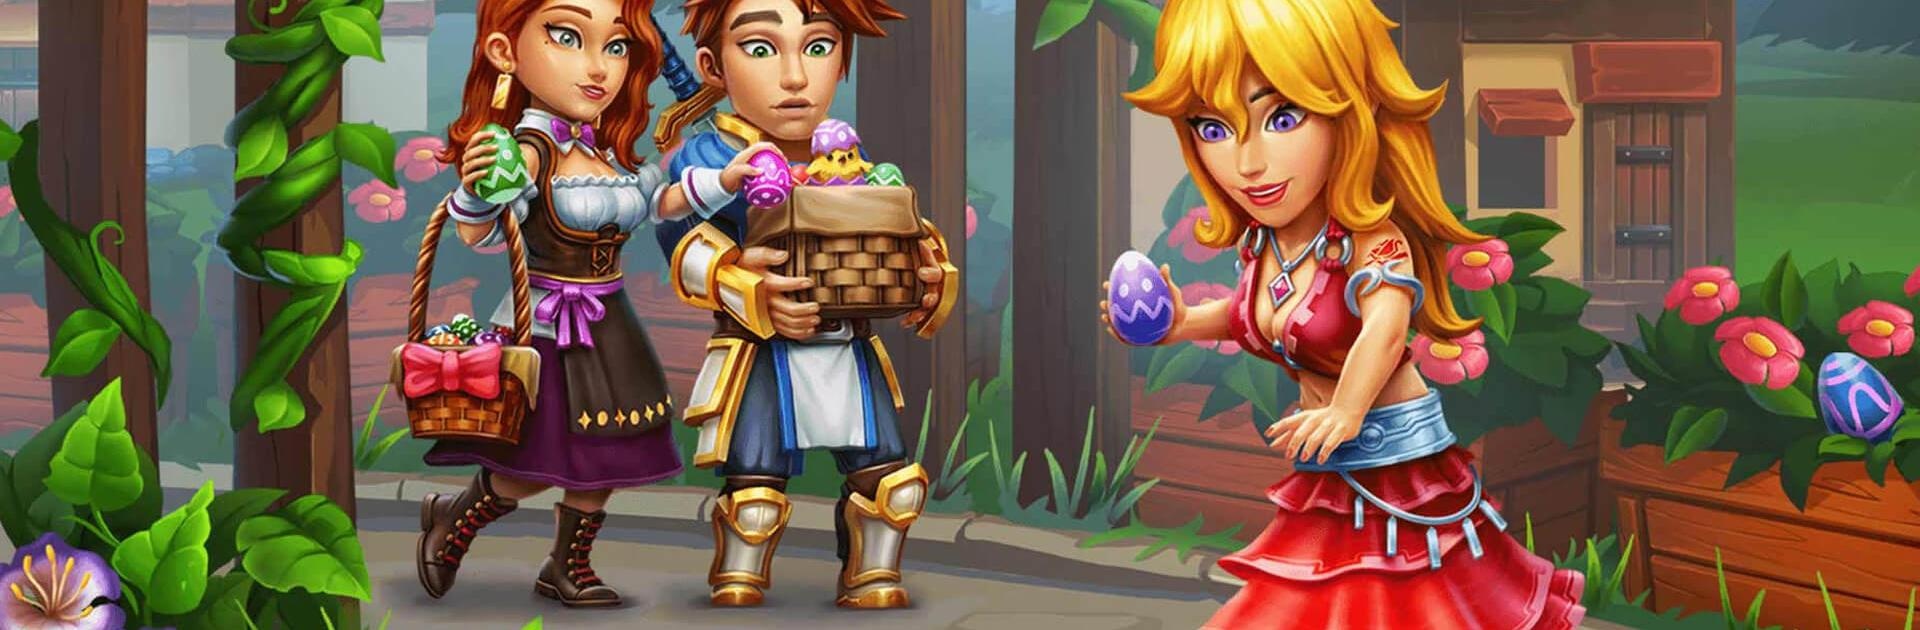 Play Shop Titans: Epic Idle Crafter, Build & Trade RPG Online